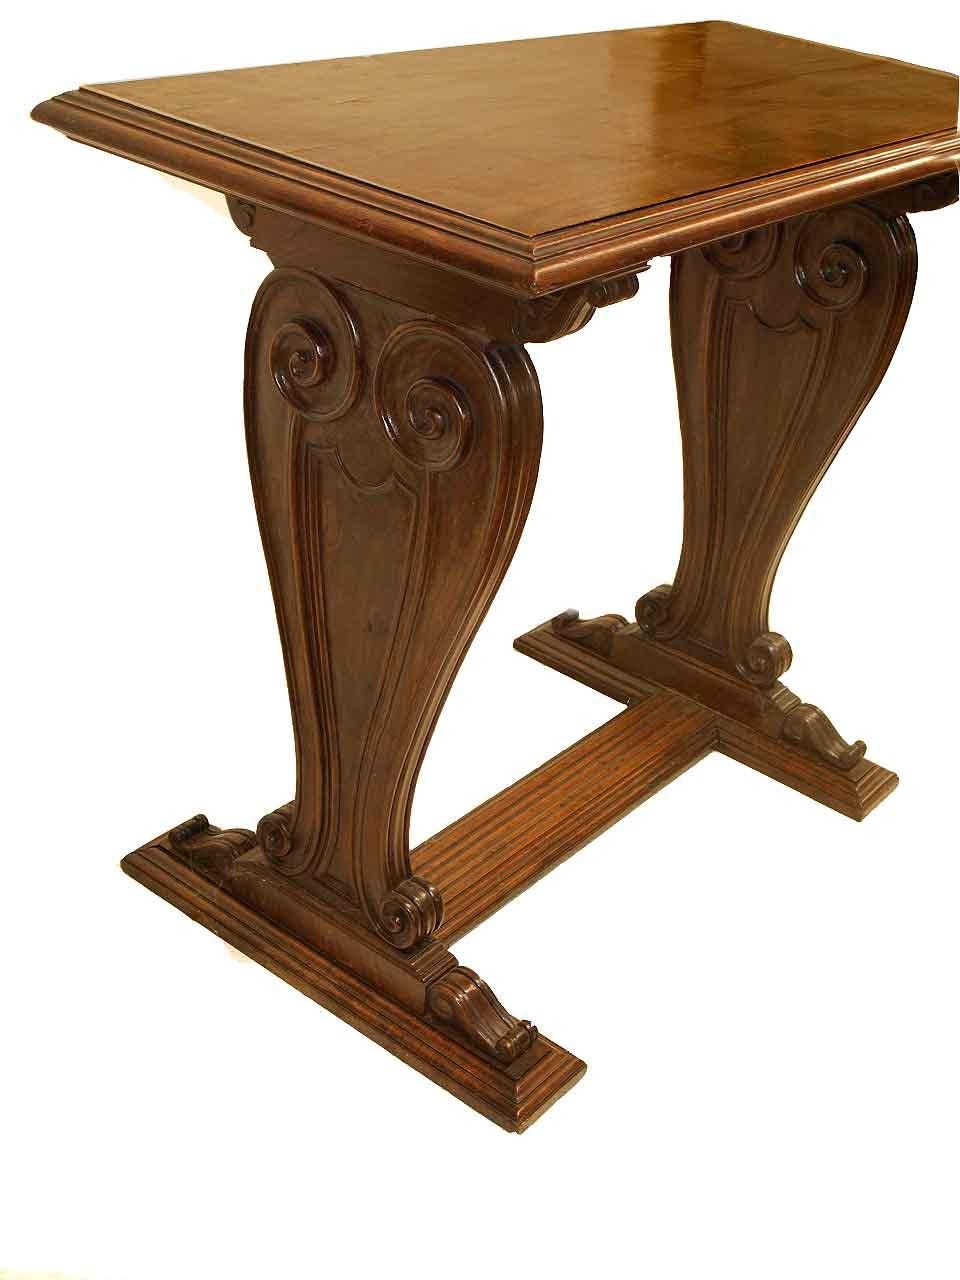 English walnut center table, this two sided table has a thick top with beautiful grain and multi shaped molding; the lyre shaped supports have molded edges, arabesques, volutes, and other architectural features on the outside and inside; the base